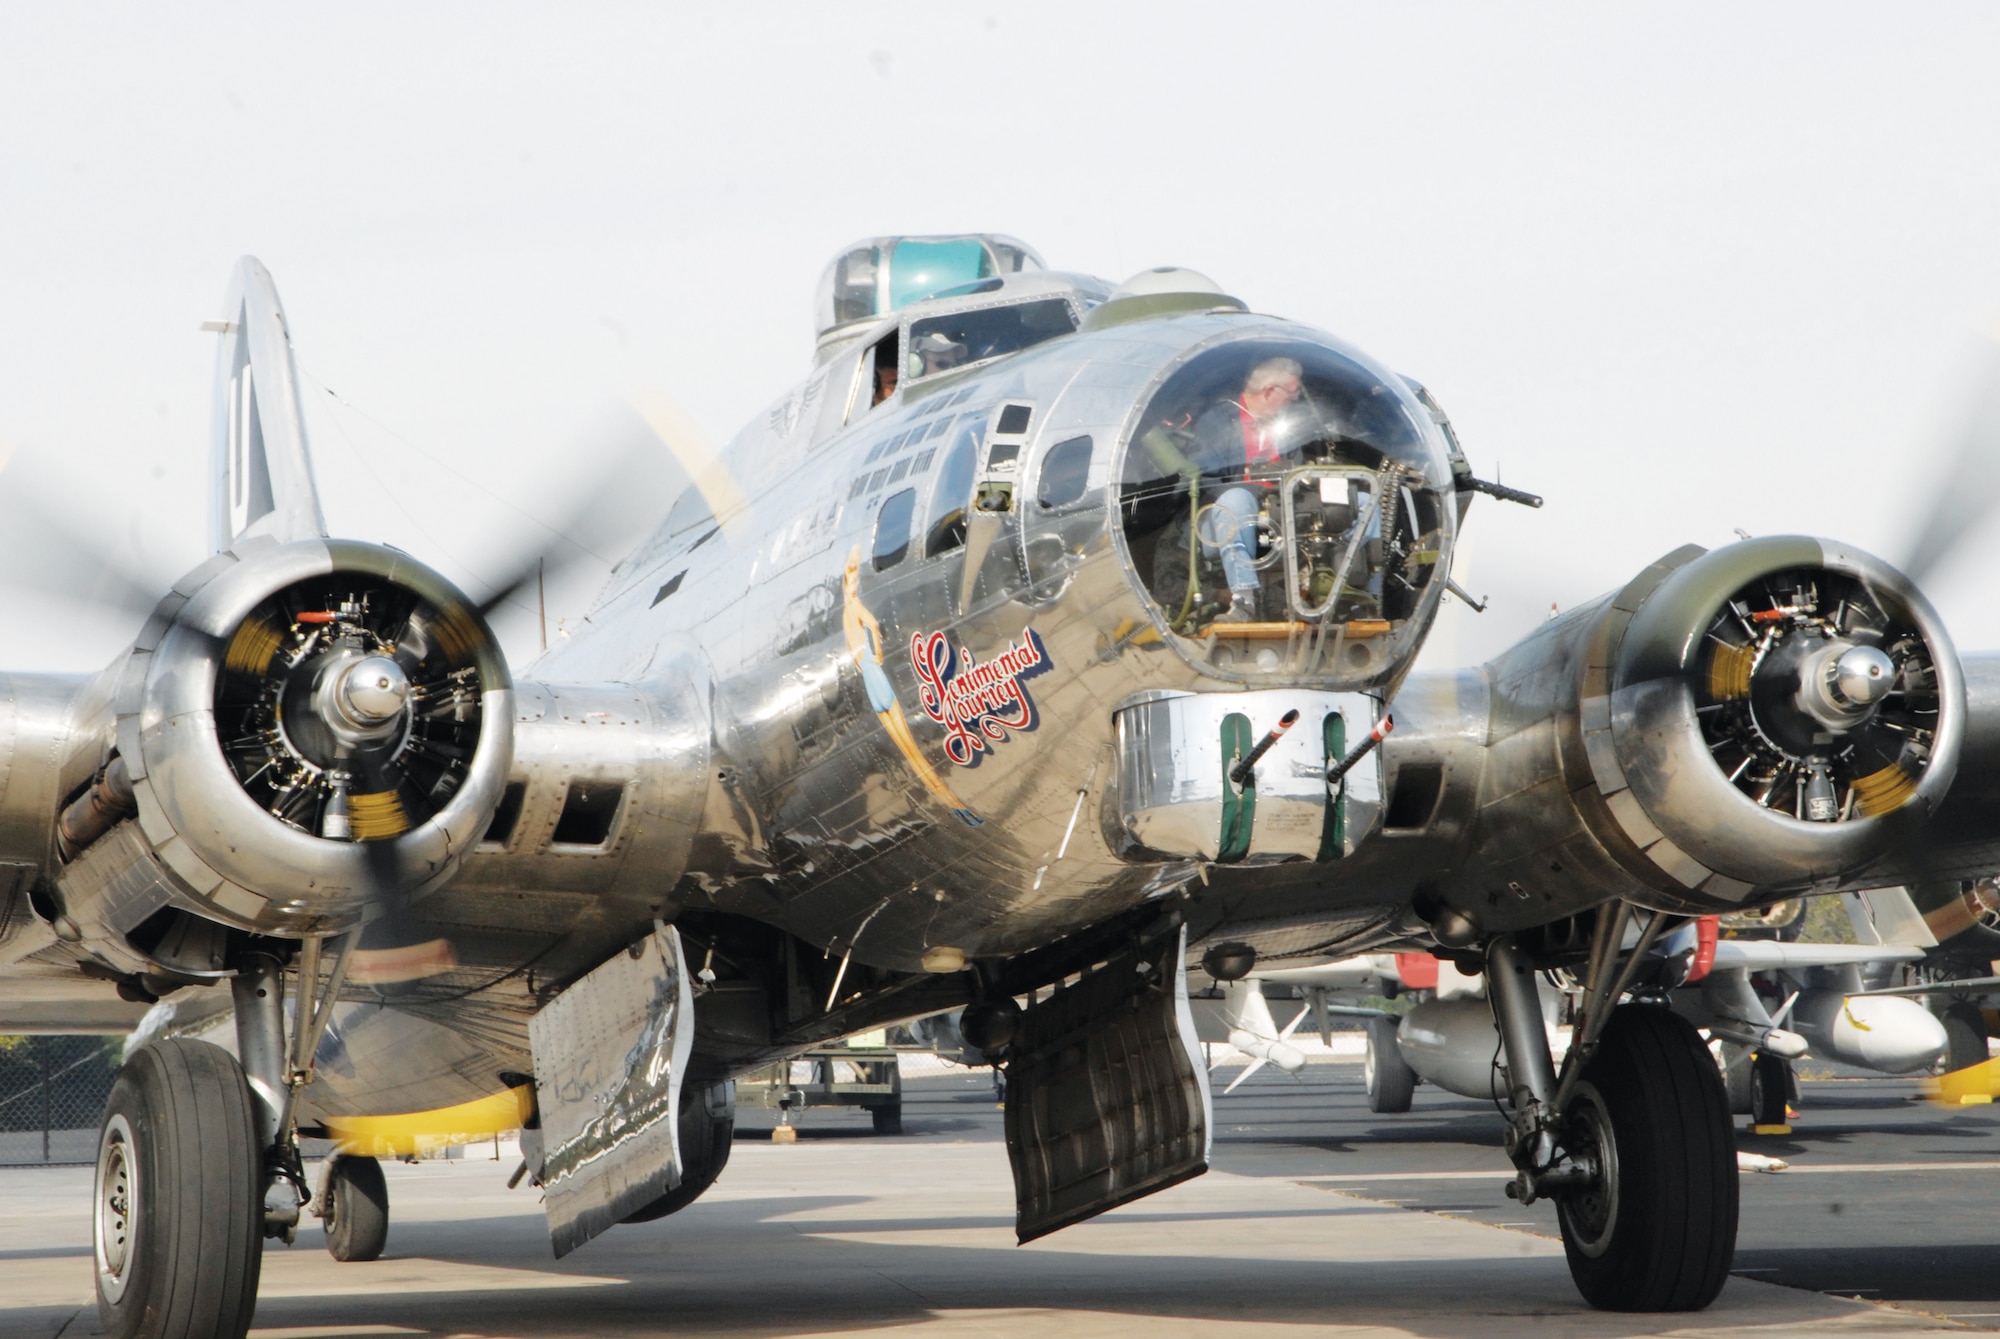 As the members took their seats on the B-17 March 18, the pilots tested the four engines before takeoff to Luke Air Force Base. This B-17 model needed four turbo-charged single-row nine-cylinder air cooled radial engines to carry an extra load of 8,000 pounds.  (U.S. Air Force photo/Airman 1st Class David Owsianka)